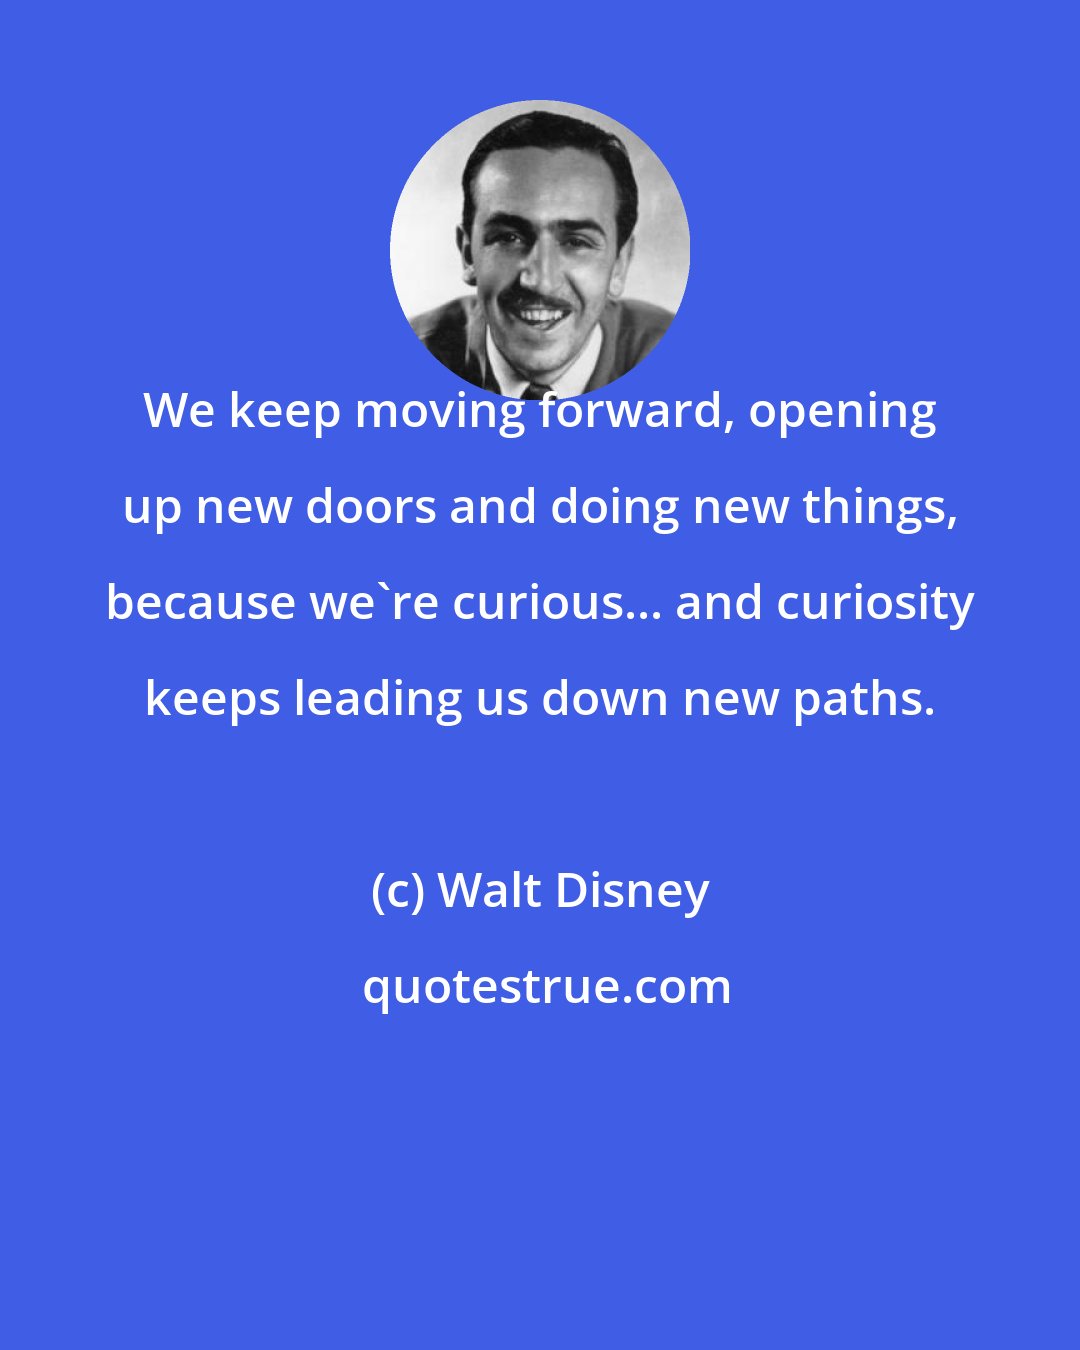 Walt Disney: We keep moving forward, opening up new doors and doing new things, because we're curious... and curiosity keeps leading us down new paths.